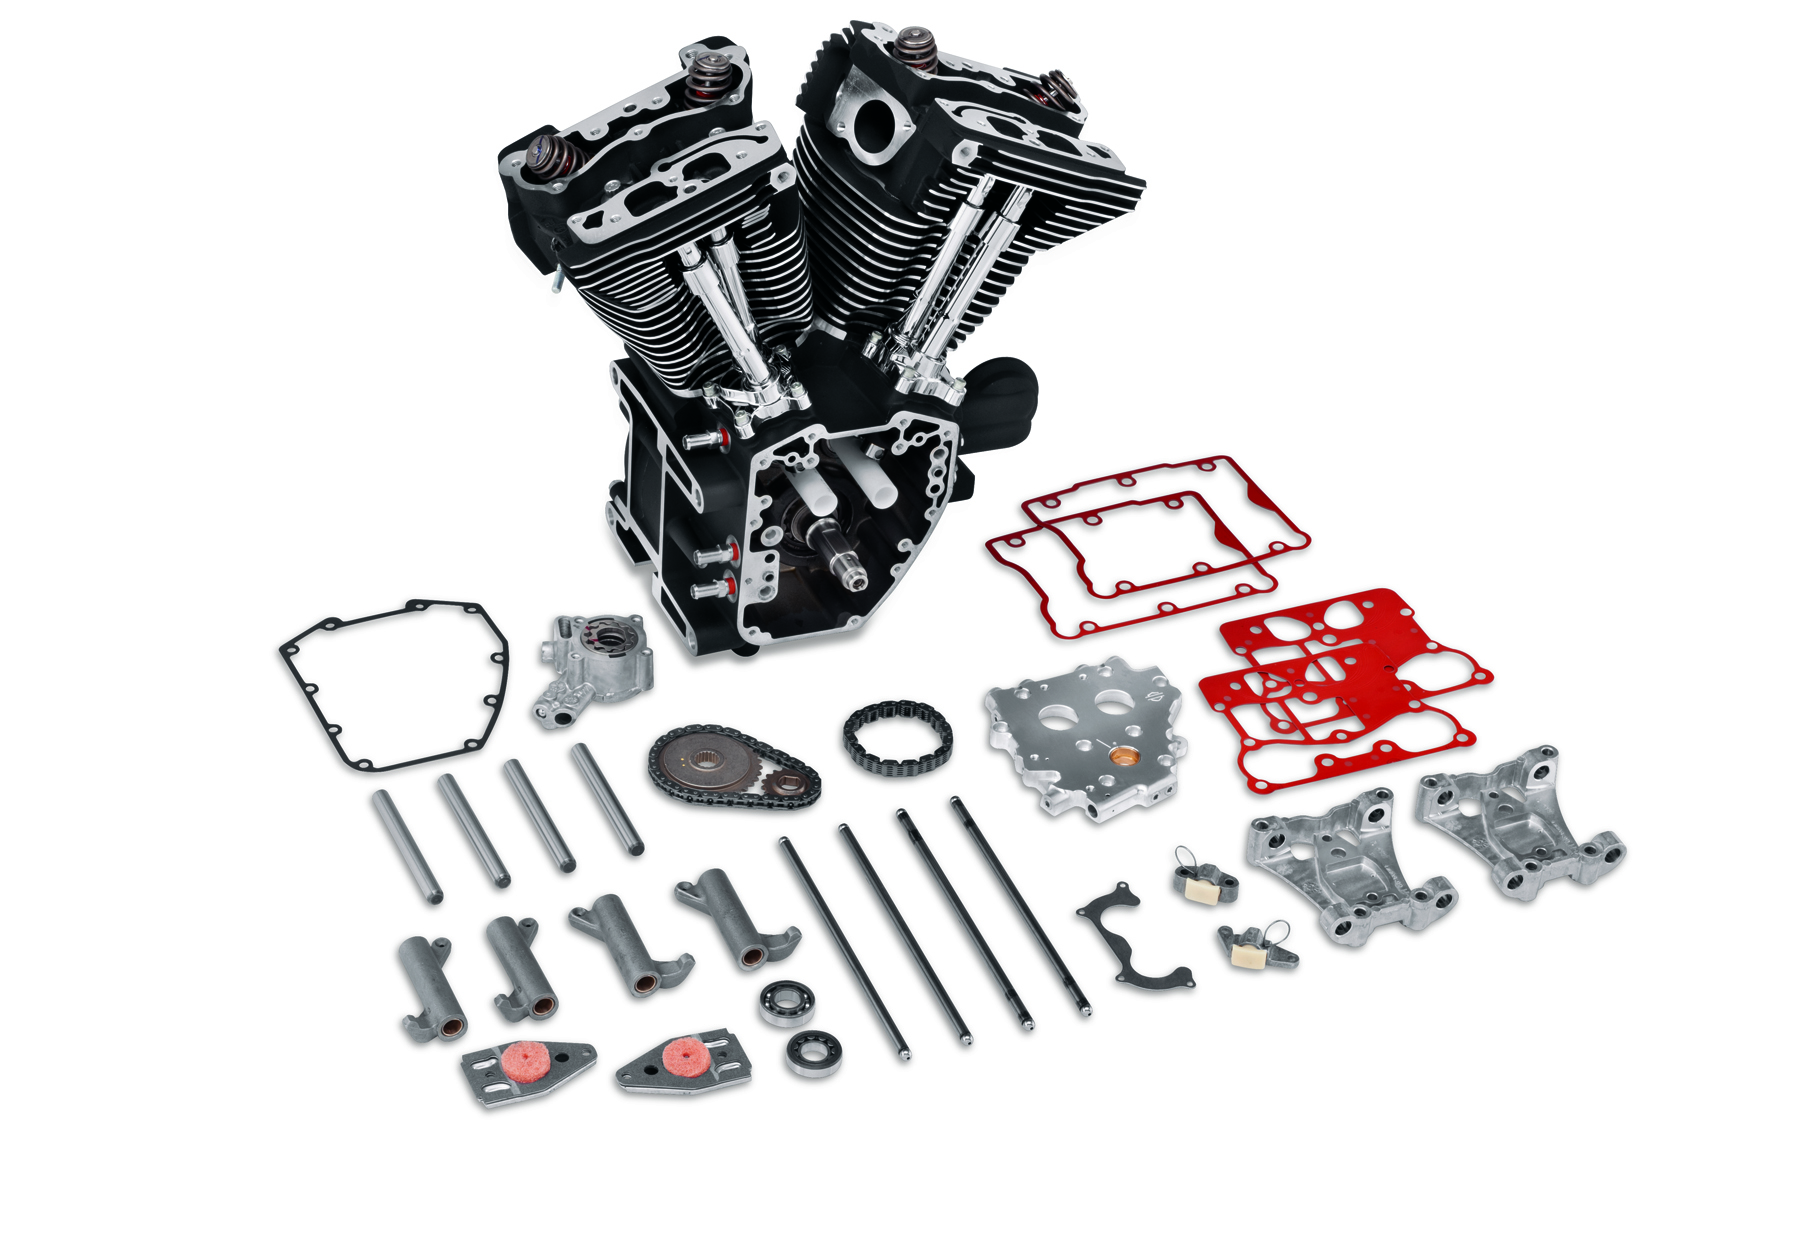 Harley Davidson Introduces New Factory Re Built Engine Replacement Program Cycle World